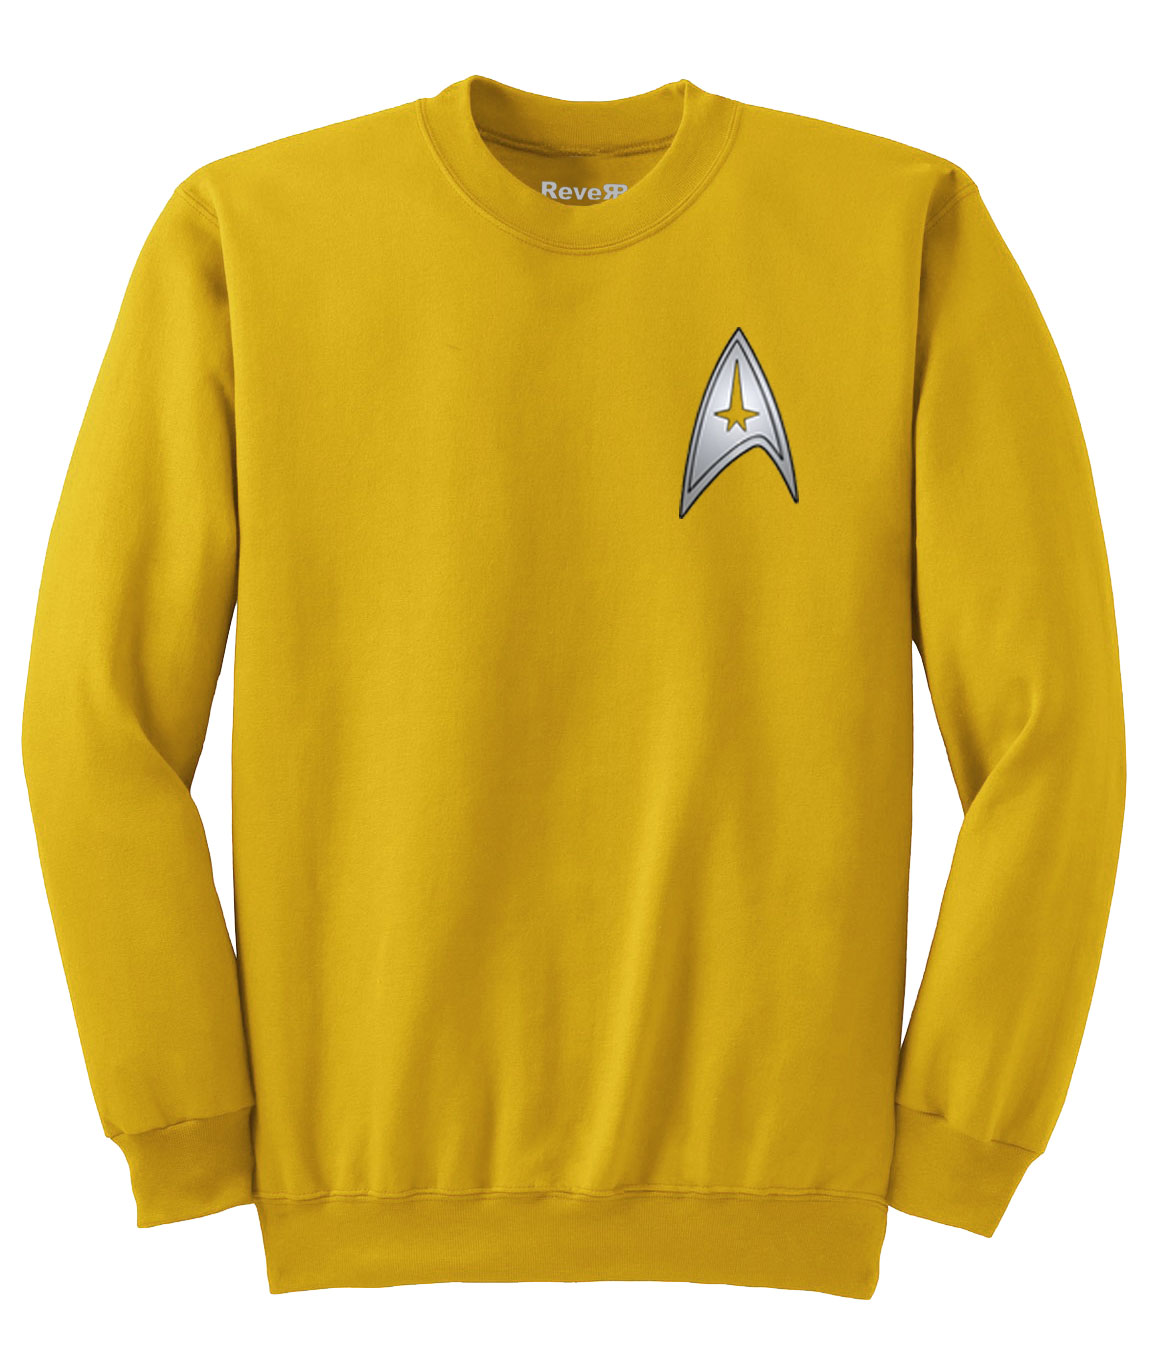 star trek sweater outfit